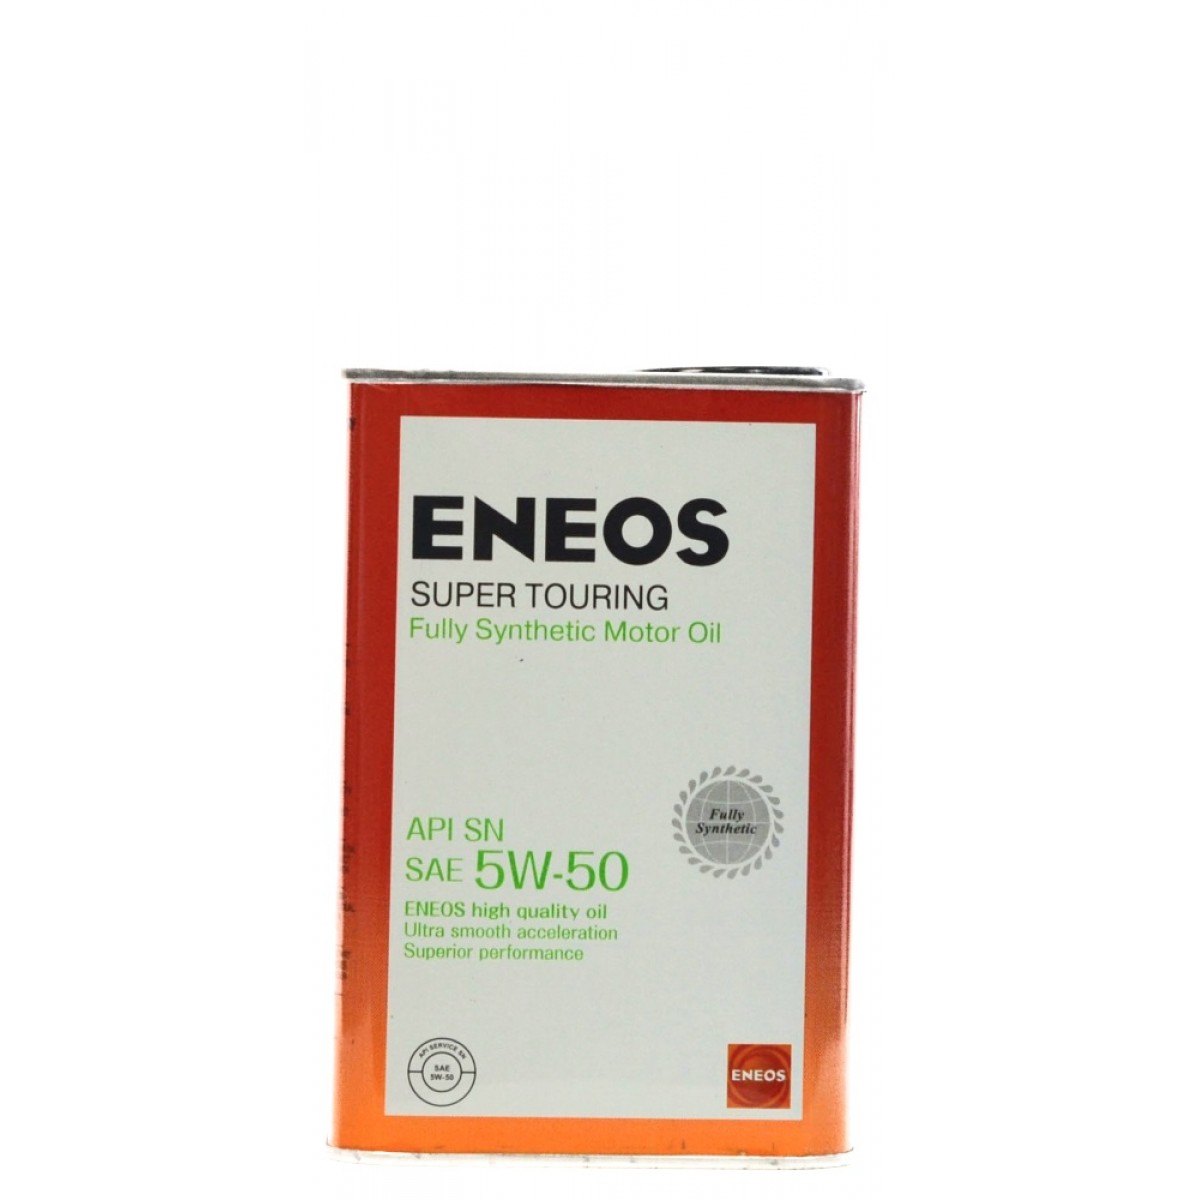 Моторное масло eneos 5w30. ENEOS Premium Touring SN 5w30 4л. ENEOS super Touring 100% Synt. SN 5w-50 4л. ENEOS Premium 5w-30. ENEOS Premium Touring 5w-30.